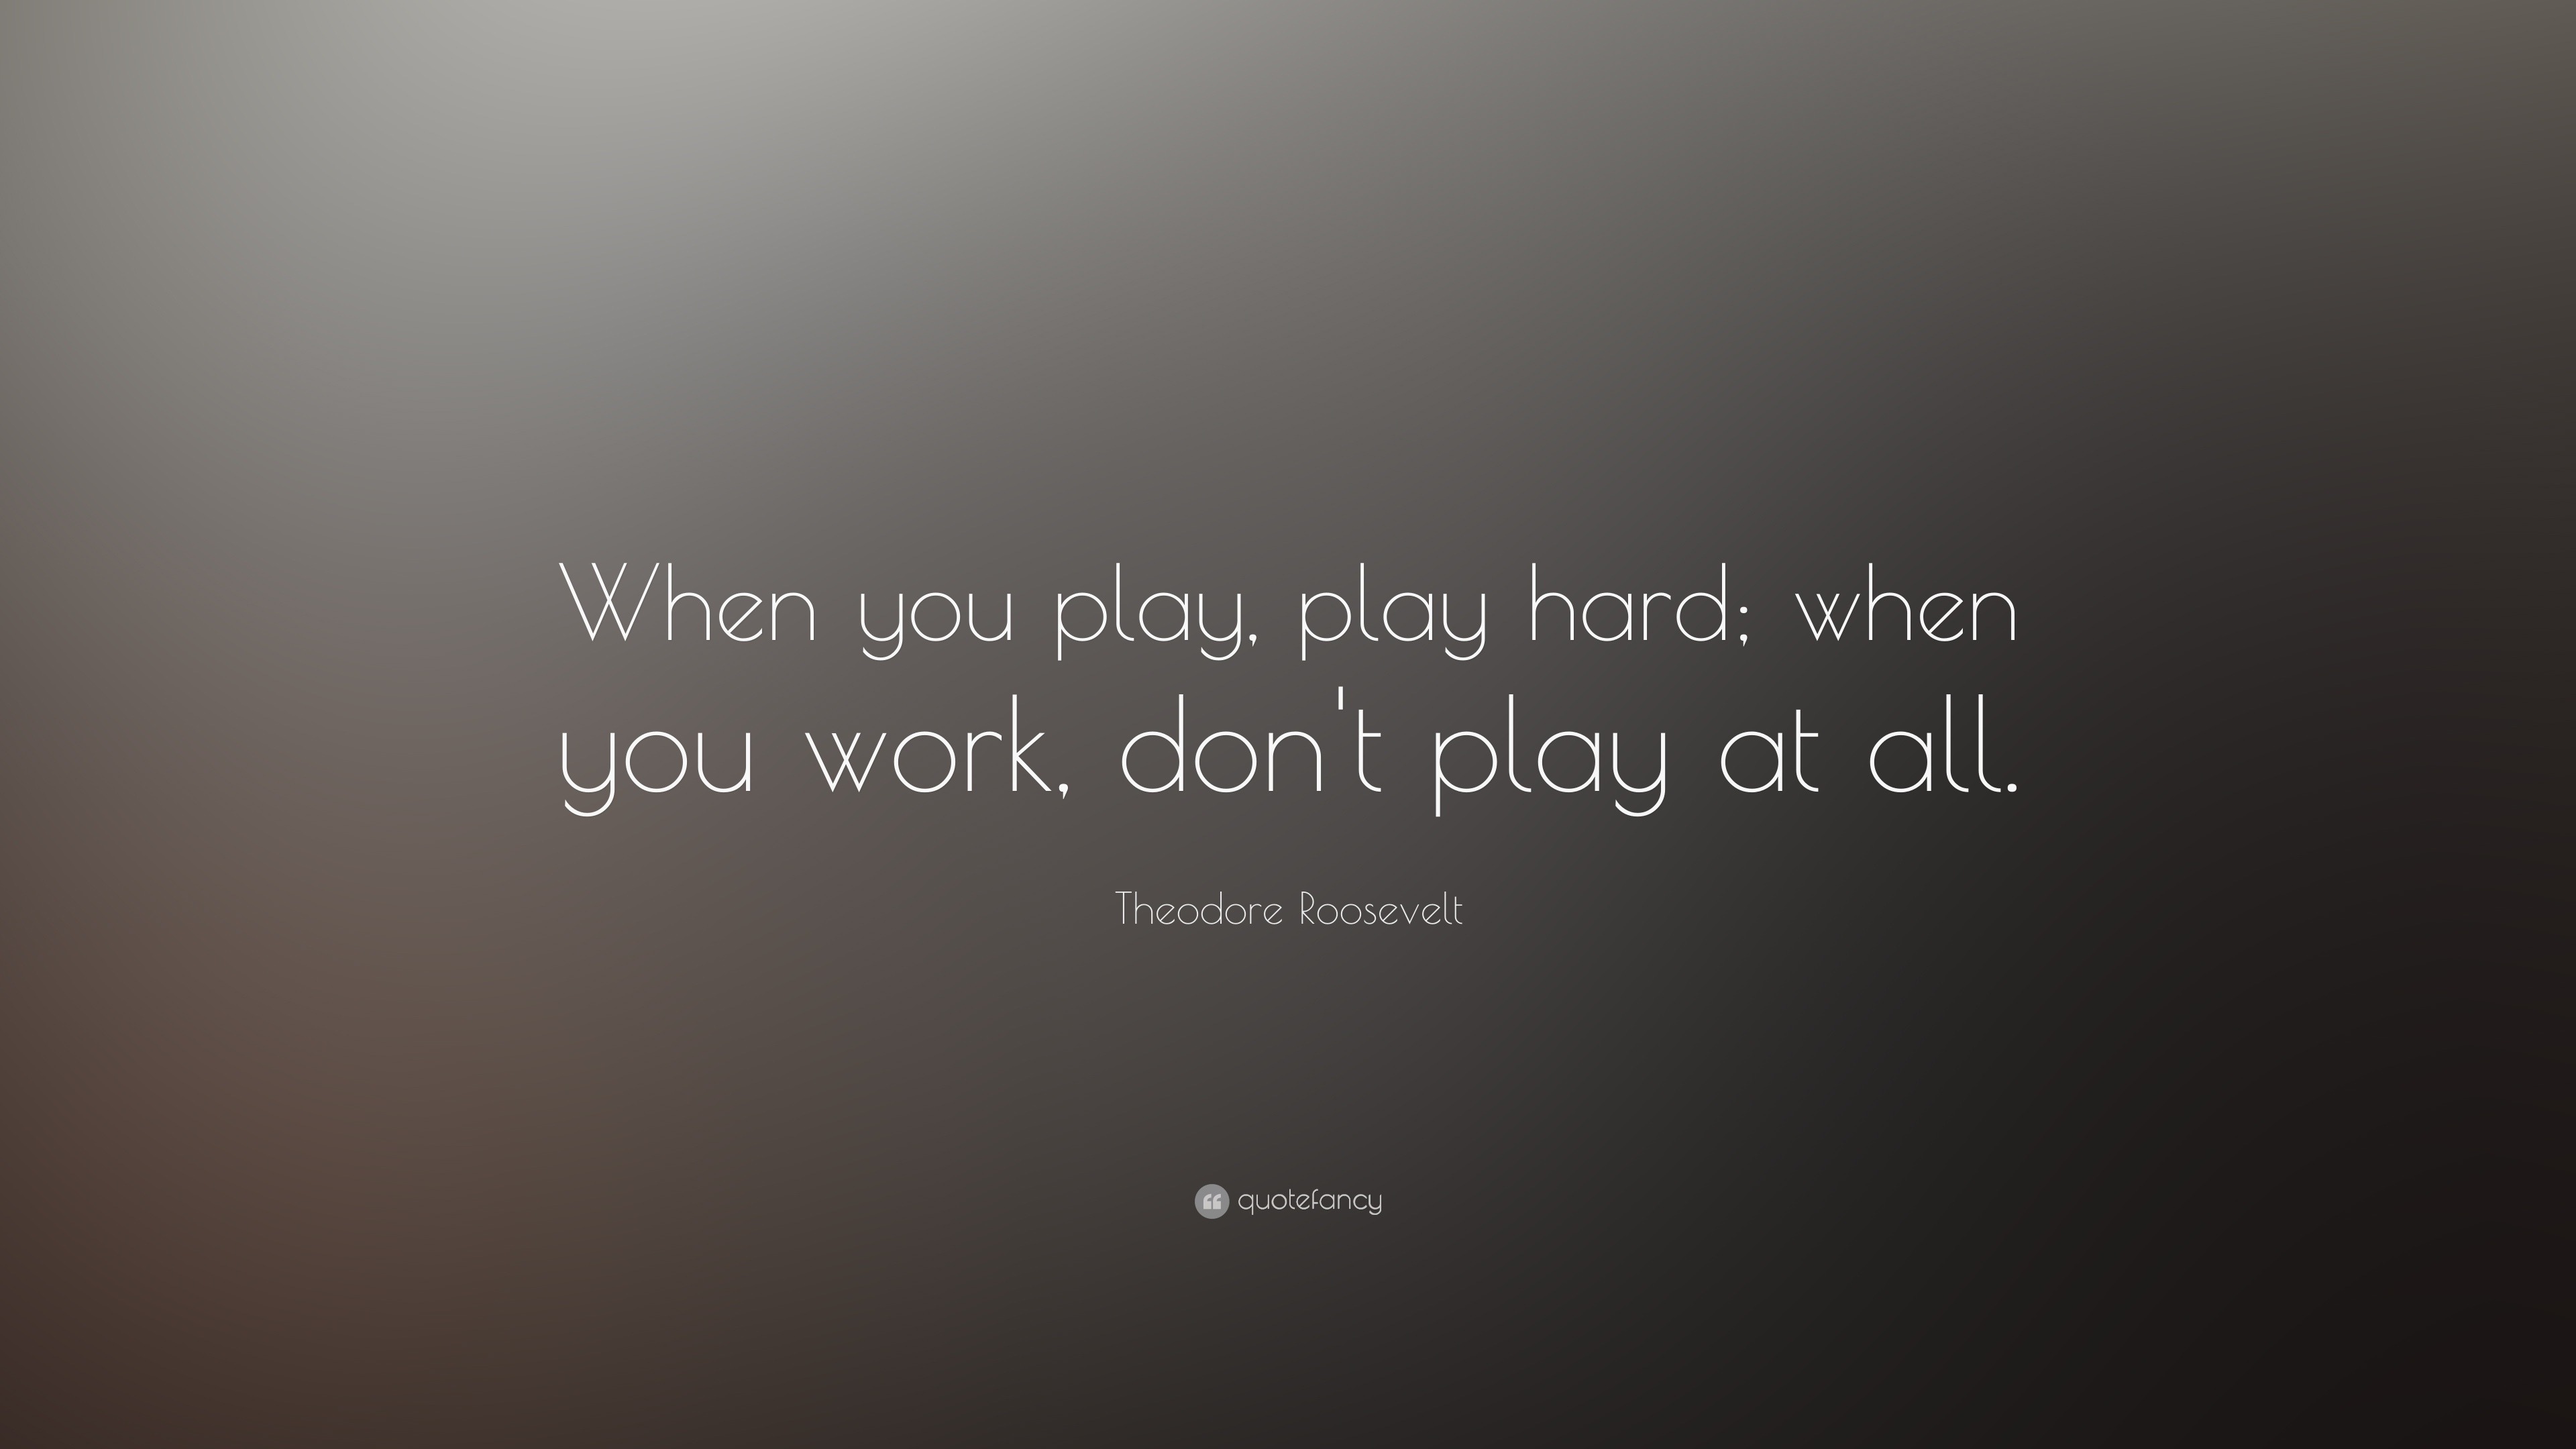 Theodore Roosevelt Quote When You Play Play Hard When You Work Don T Play At All